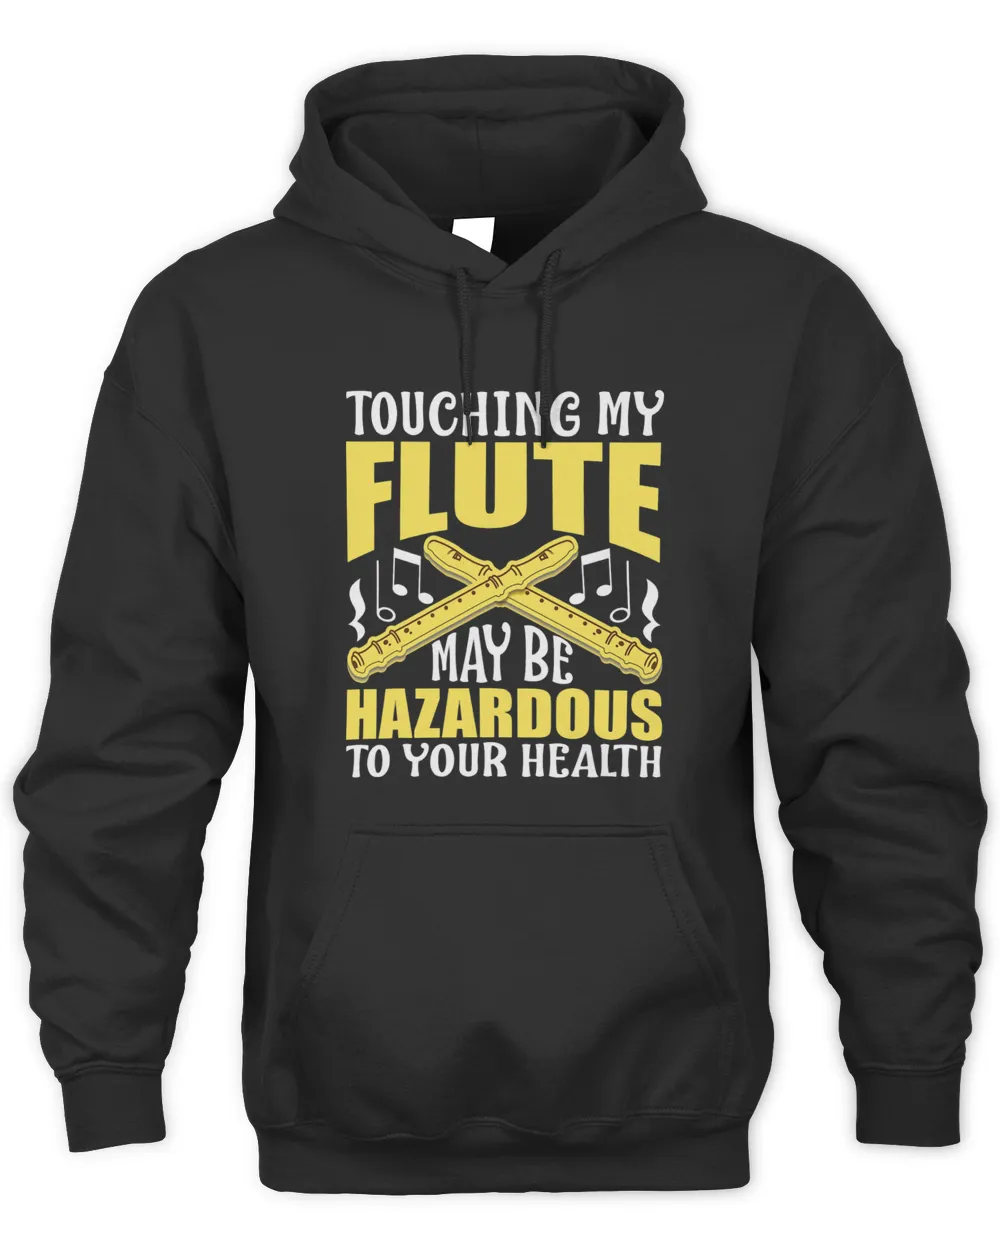 Touching My Flute May Be Hazardous To Your Health